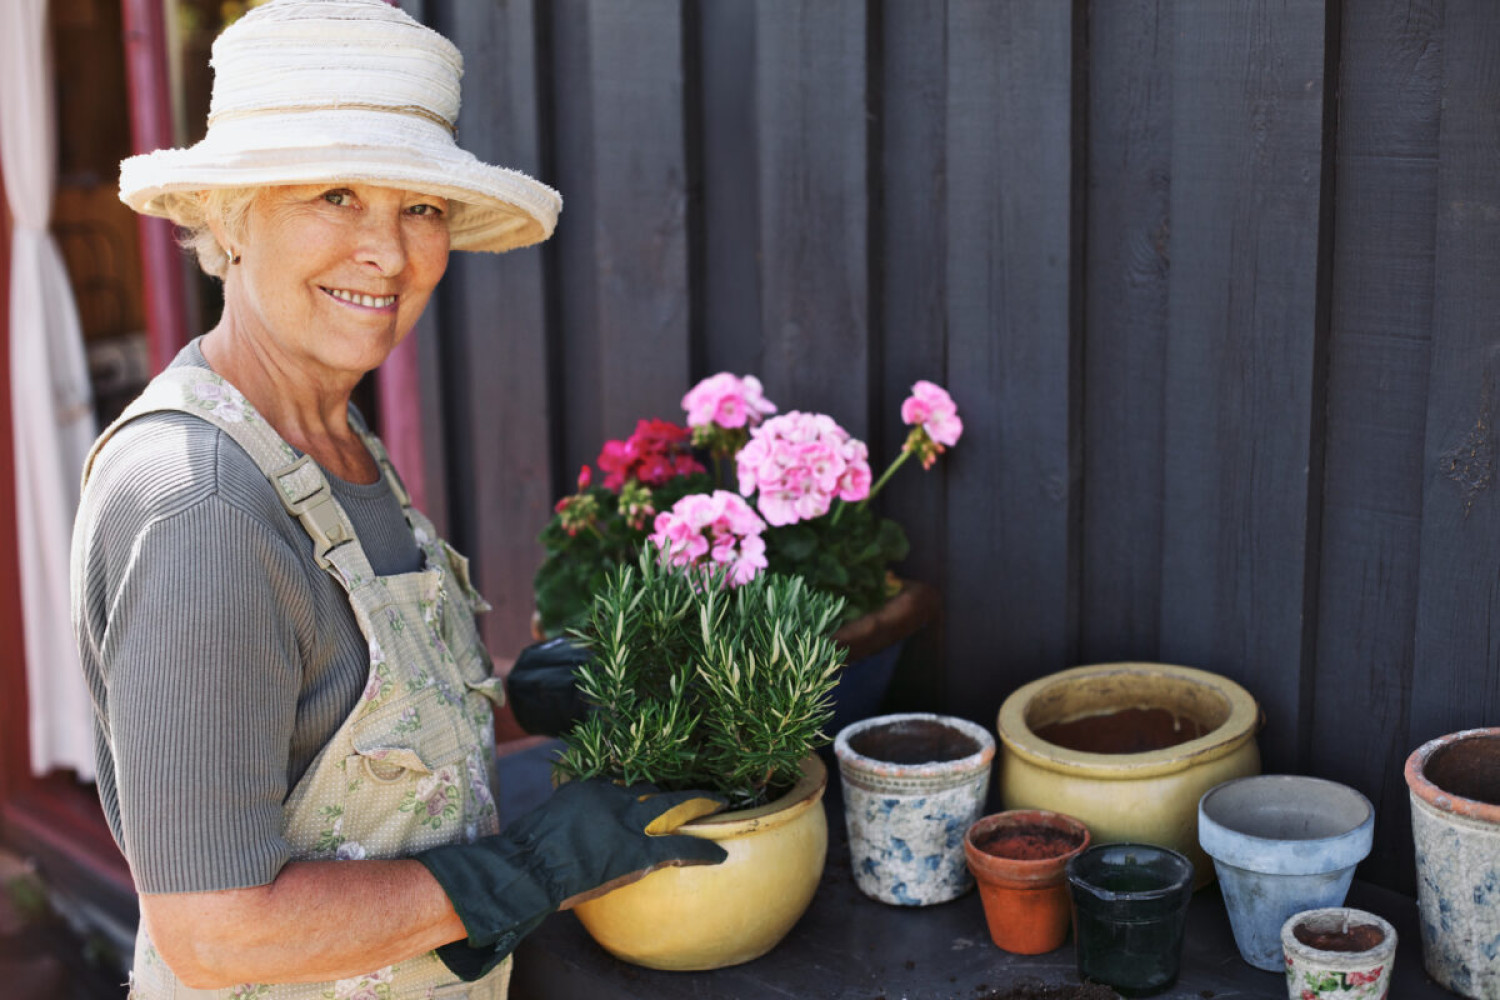 Elderly woman holding a bunch of light and dark pink flowers.